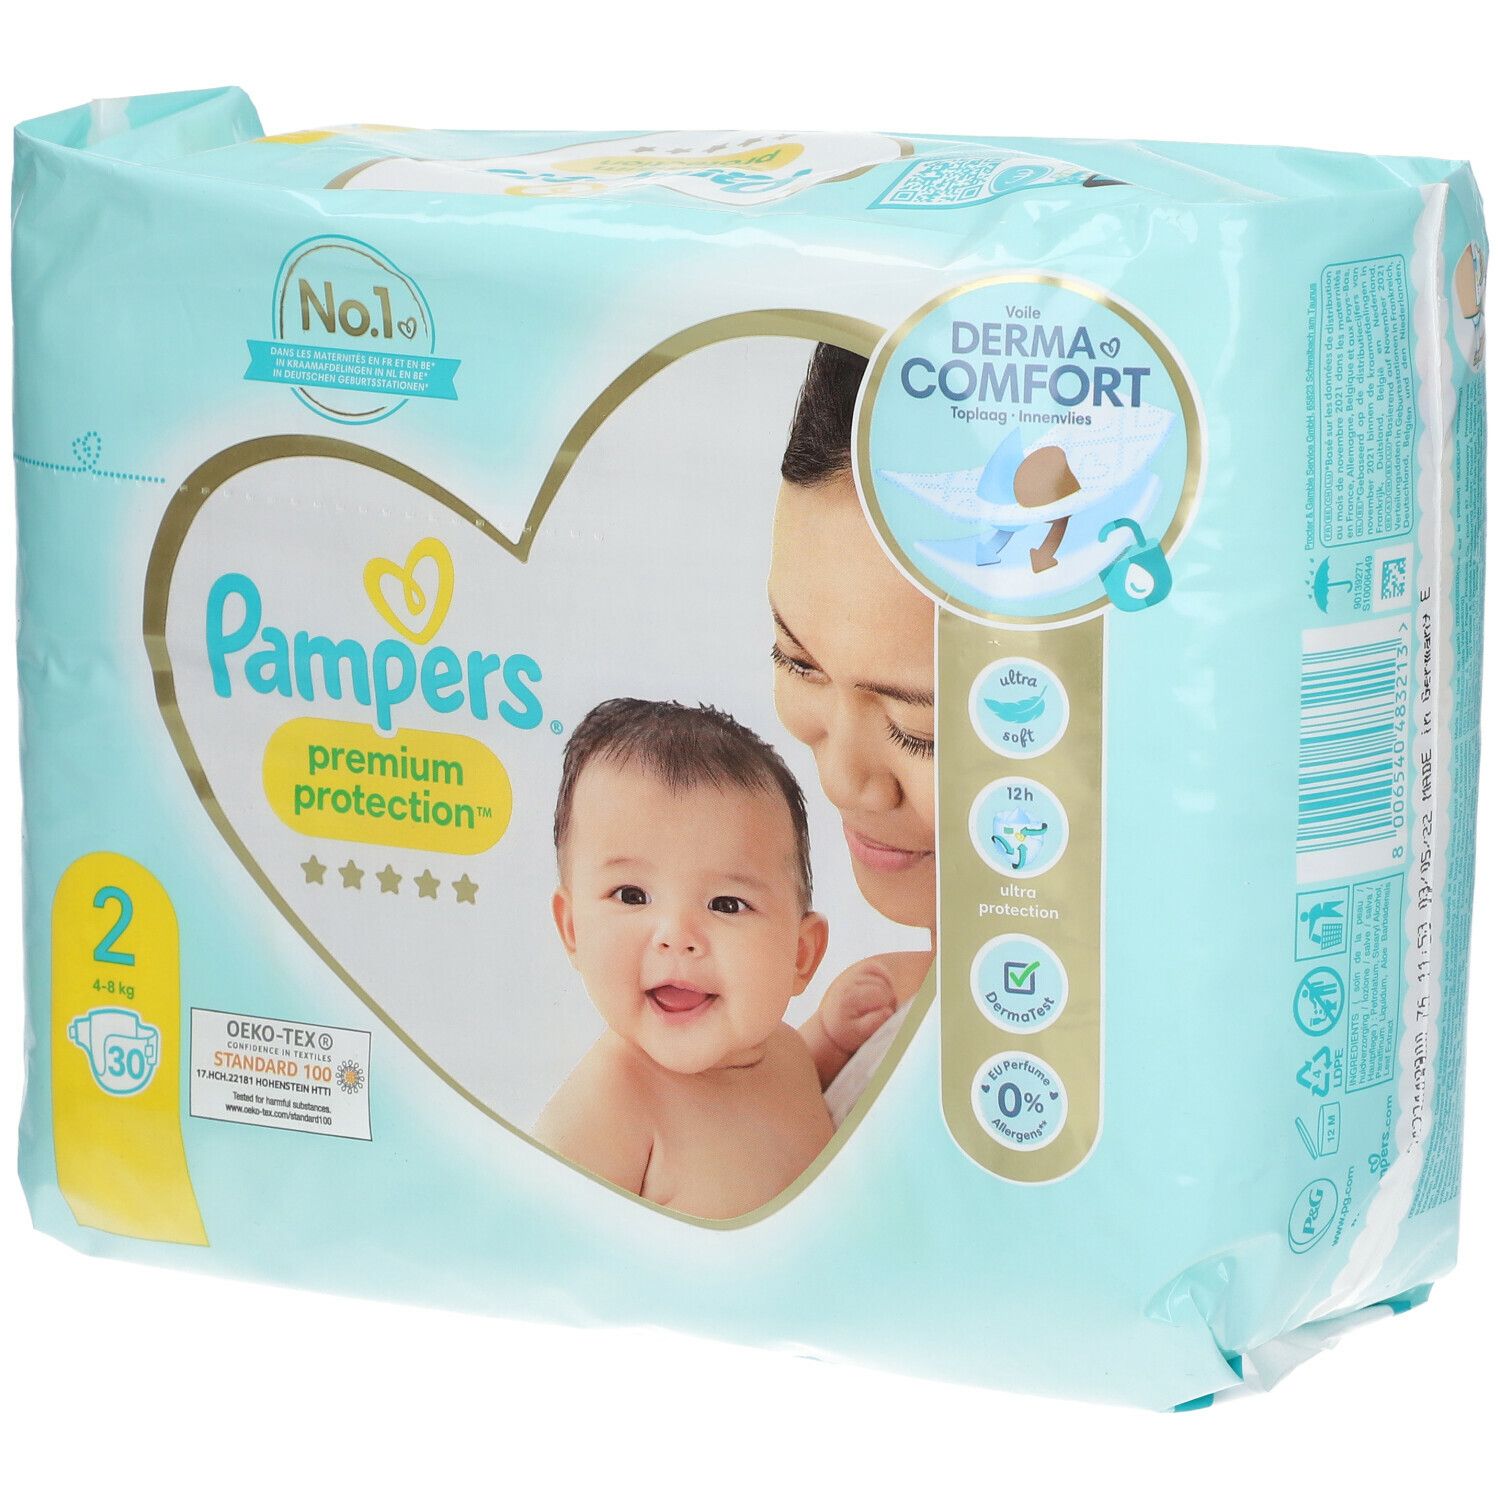 Pampers® Premium Protection™ Couche Taille 2, 4-8kg 30 pc(s) Couches